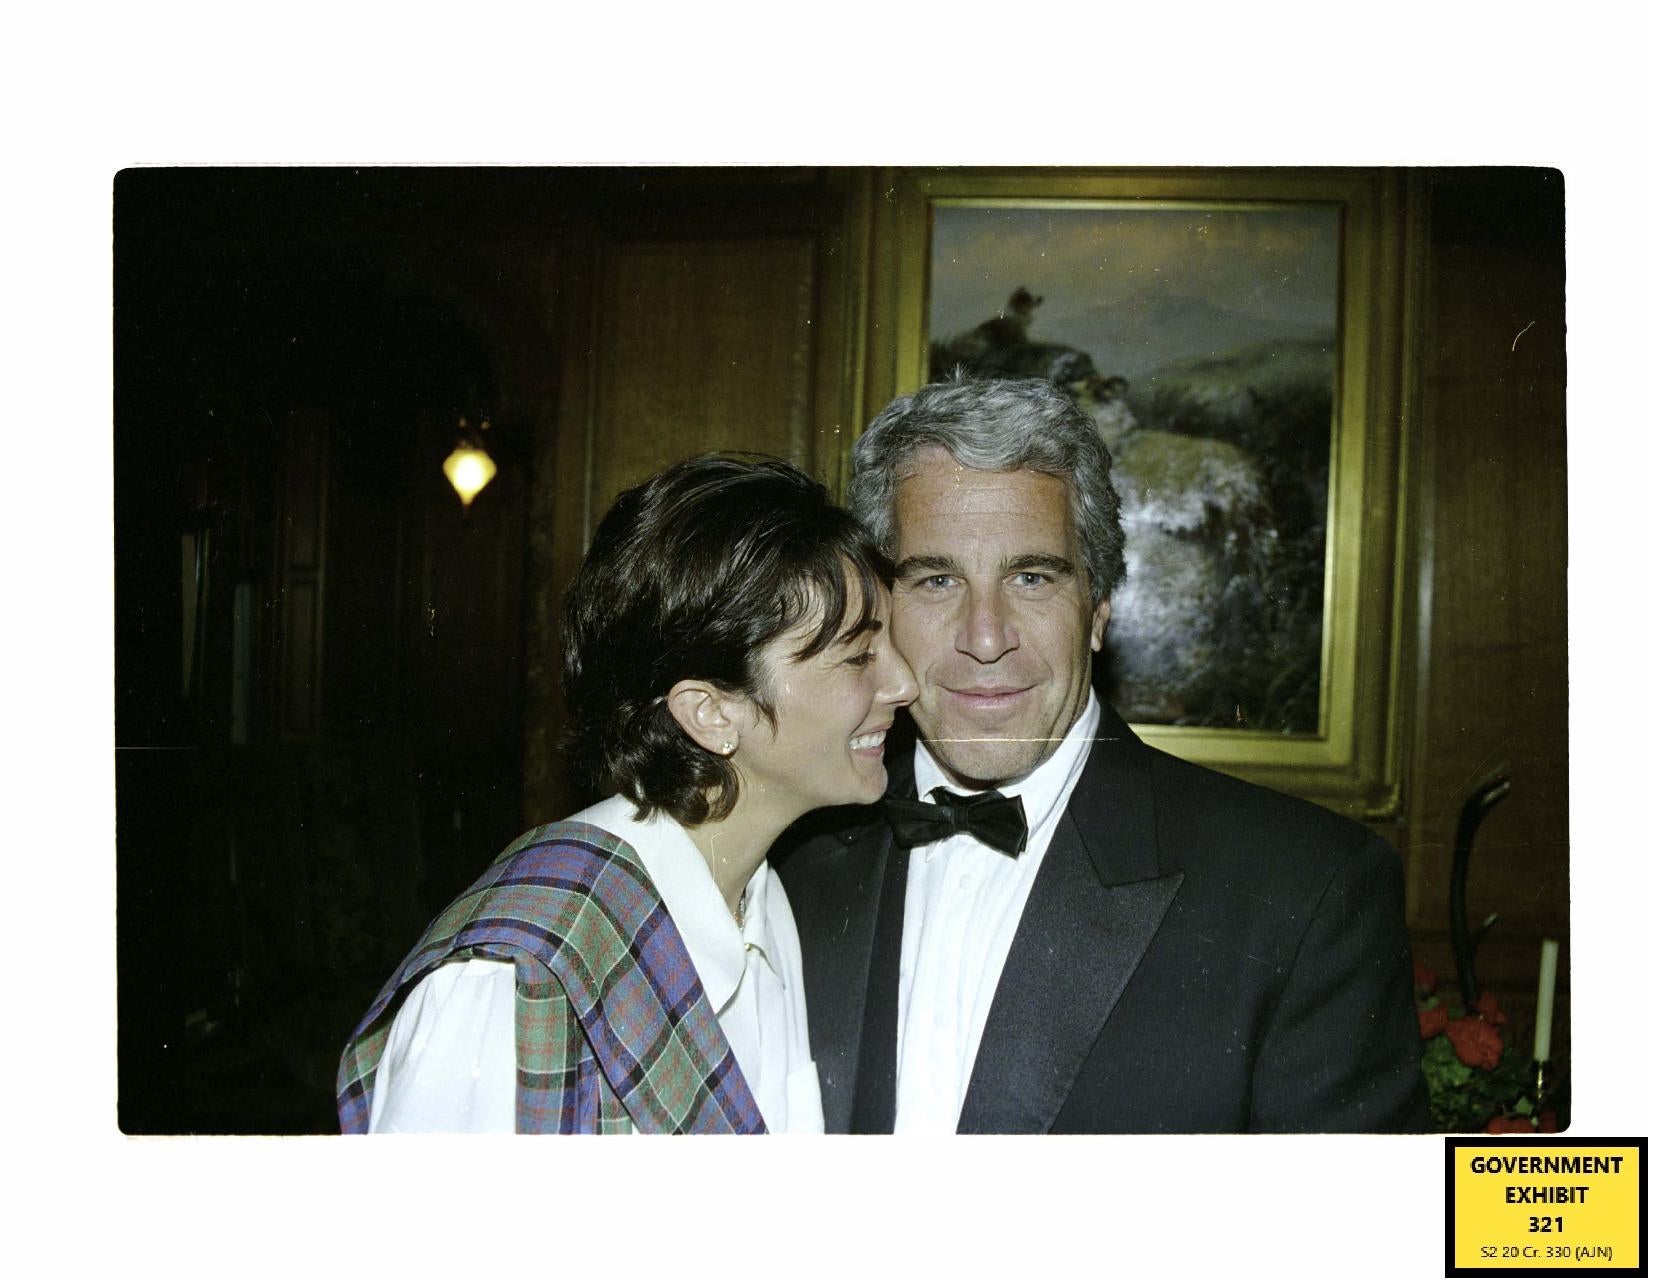 Maxwell with her former partner Epstein (US Department of Justice/PA)